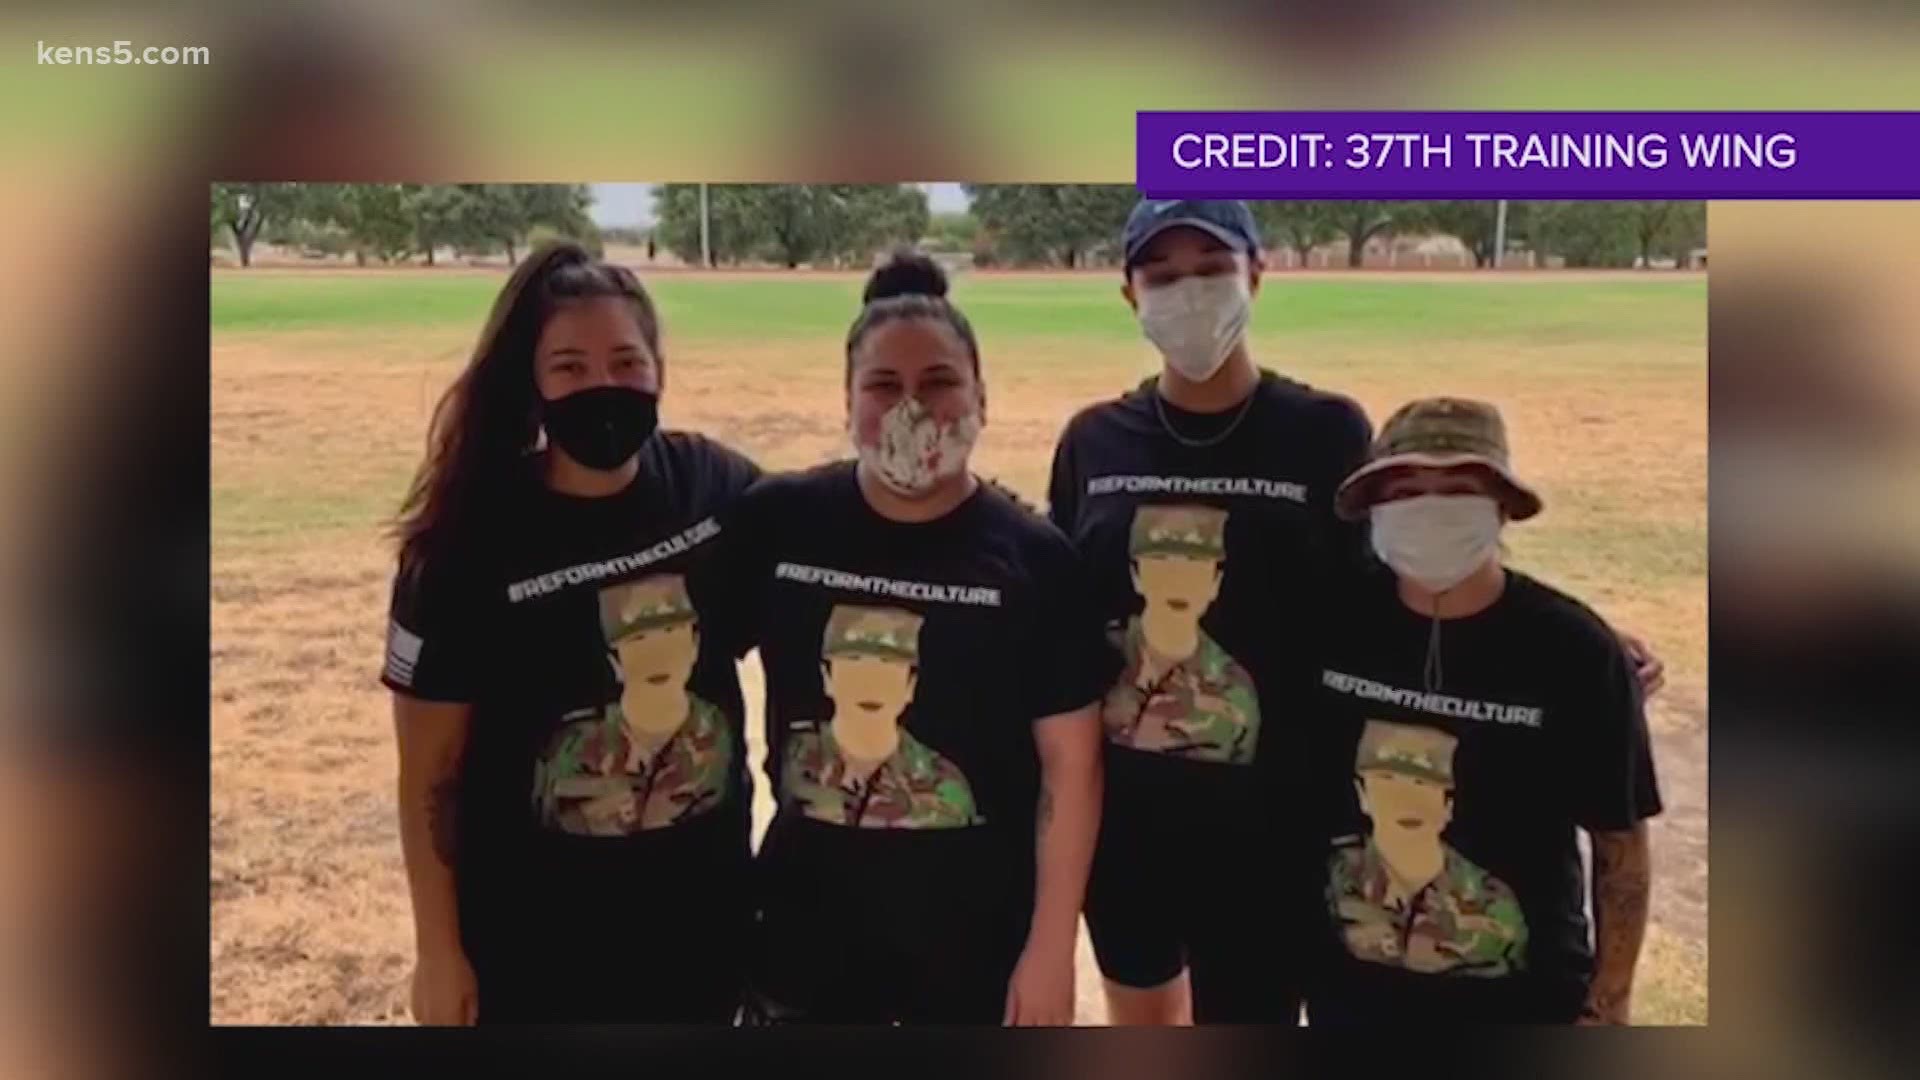 Four service members organized an honor walk to remember Vanessa Guillen, the Texas soldier who was killed. The event helped raise awareness about sexual misconduct.